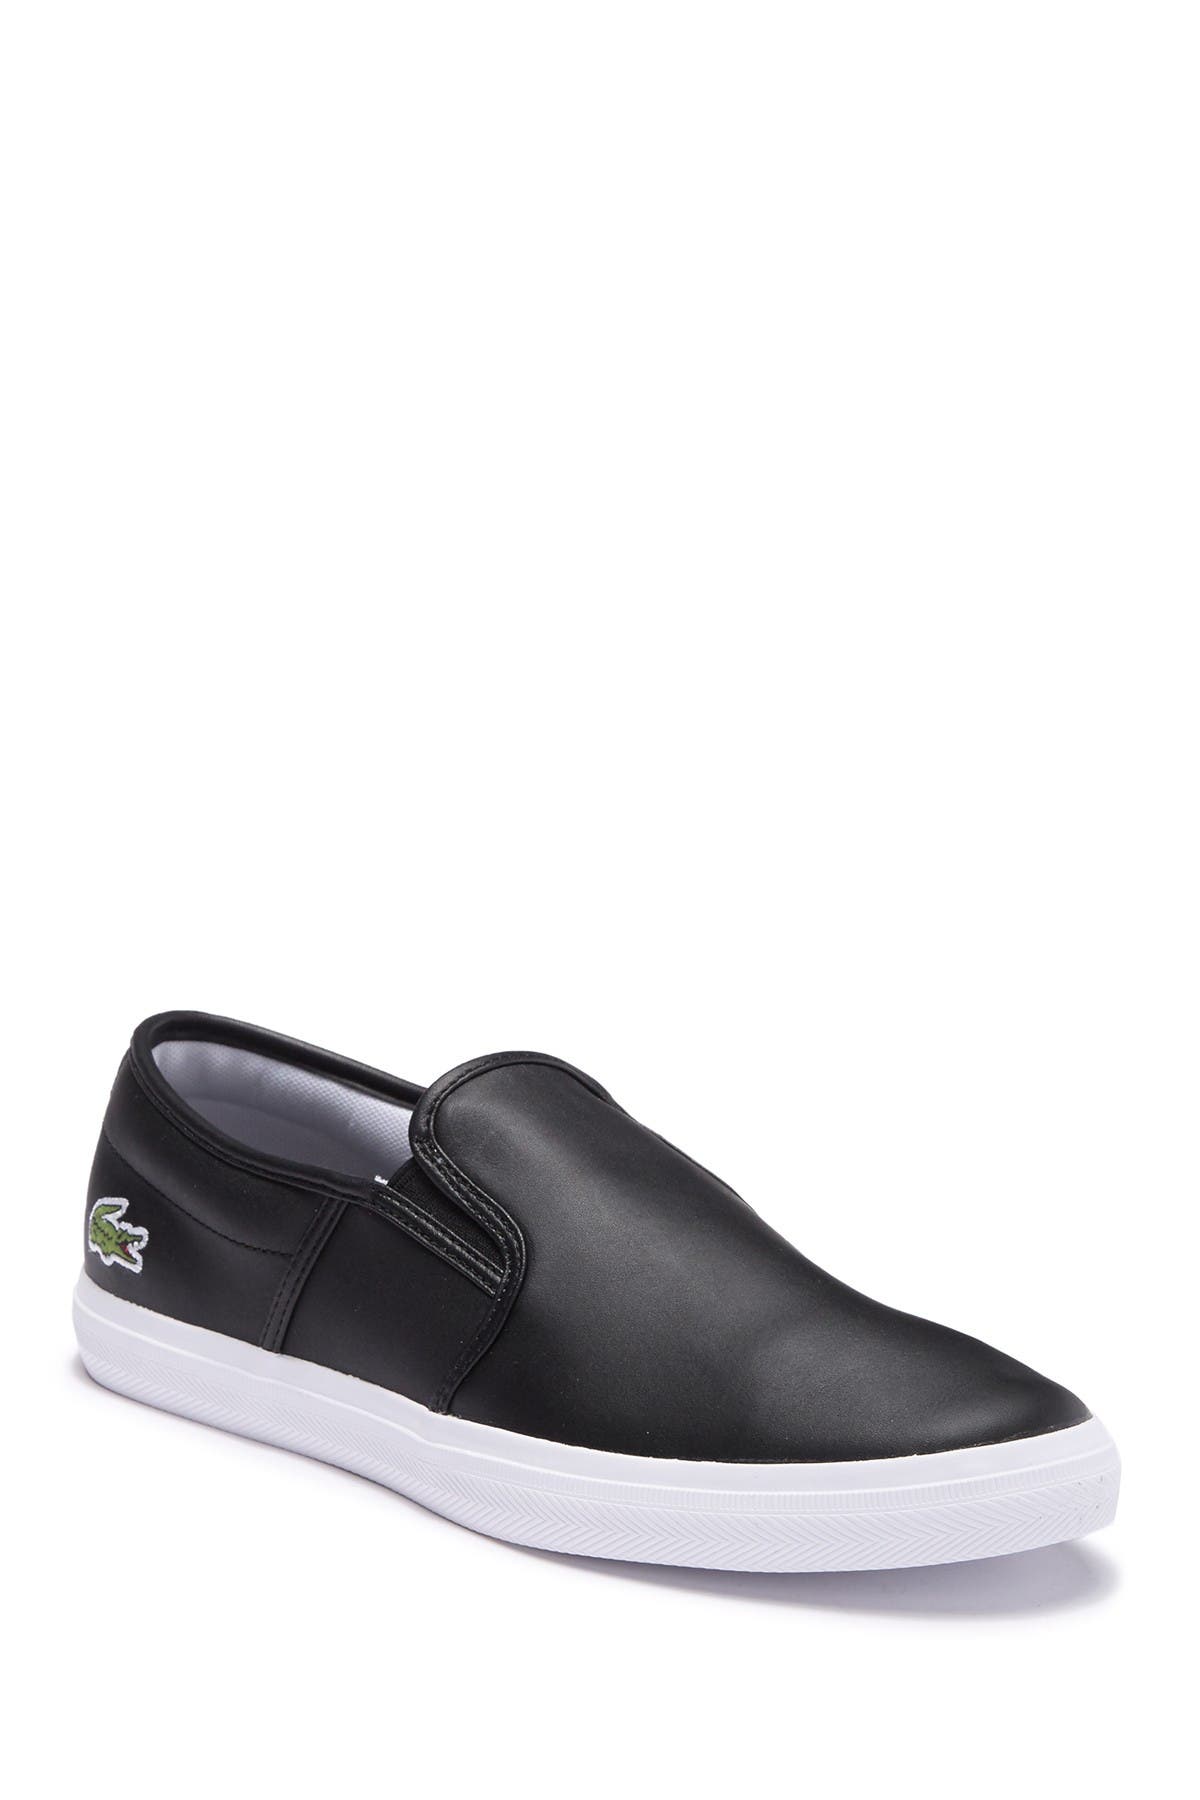 lacoste slip on leather